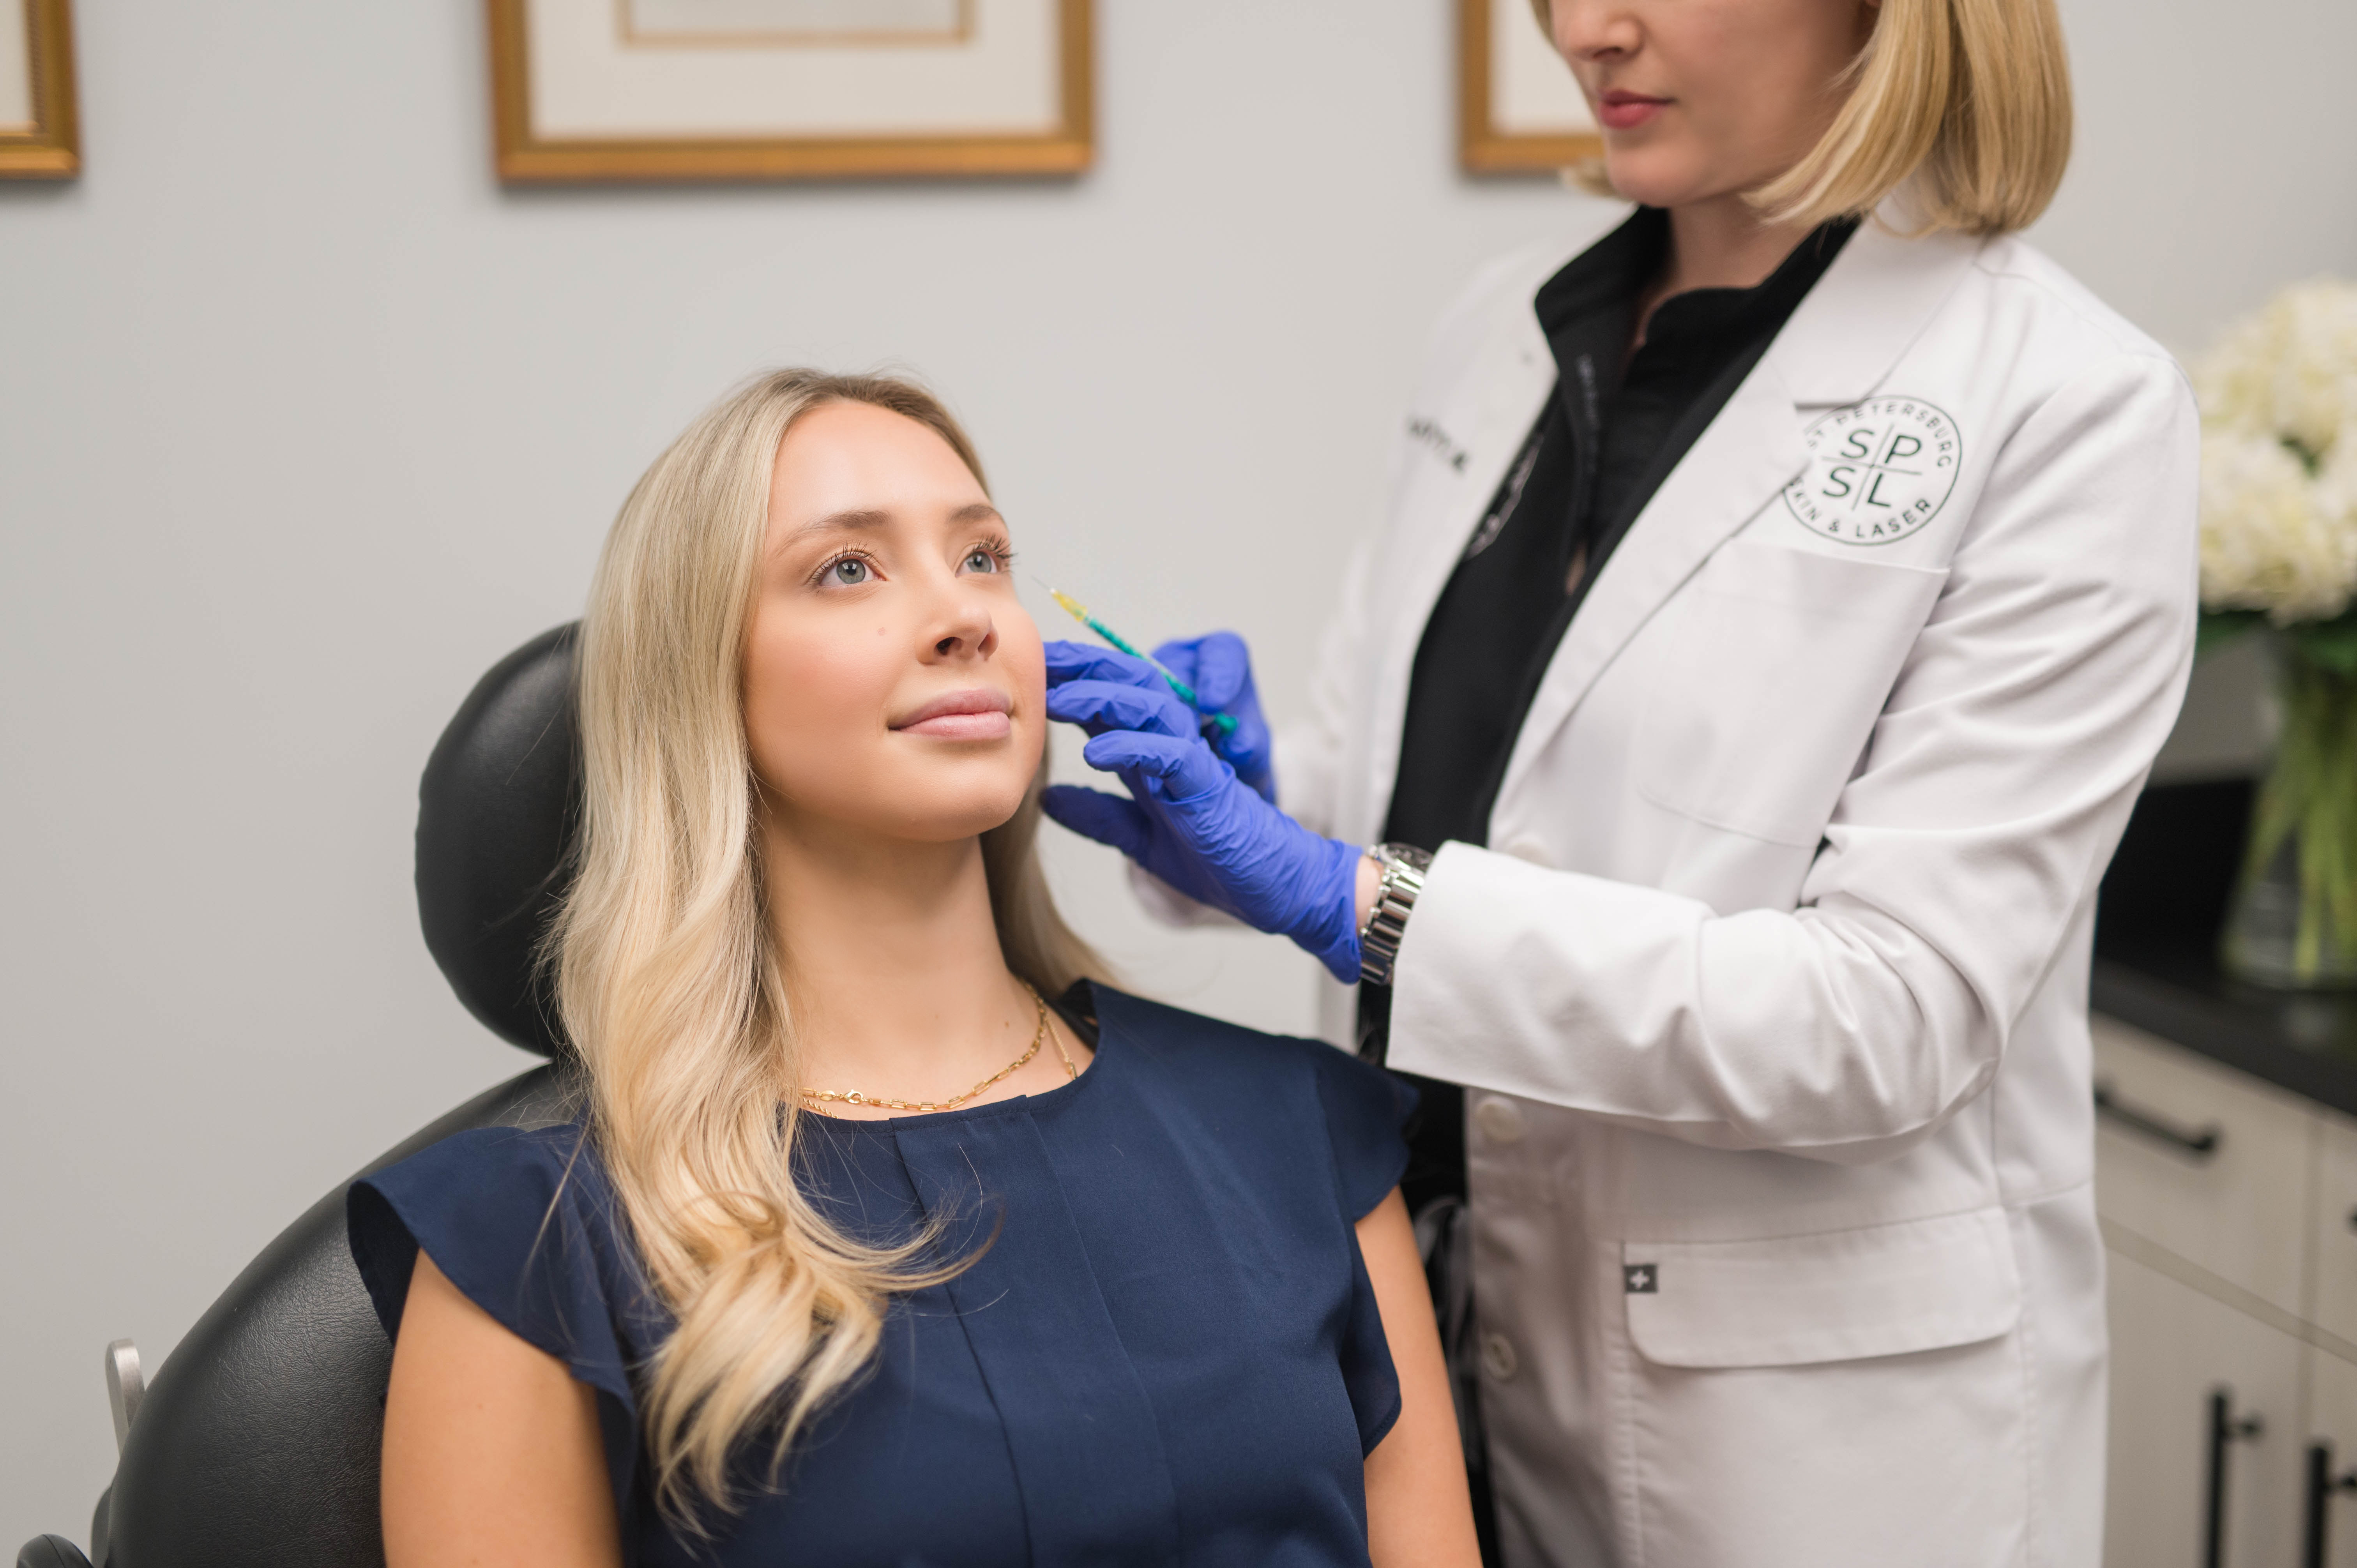 Person getting dermal fillers and wrinkle relaxers via injection